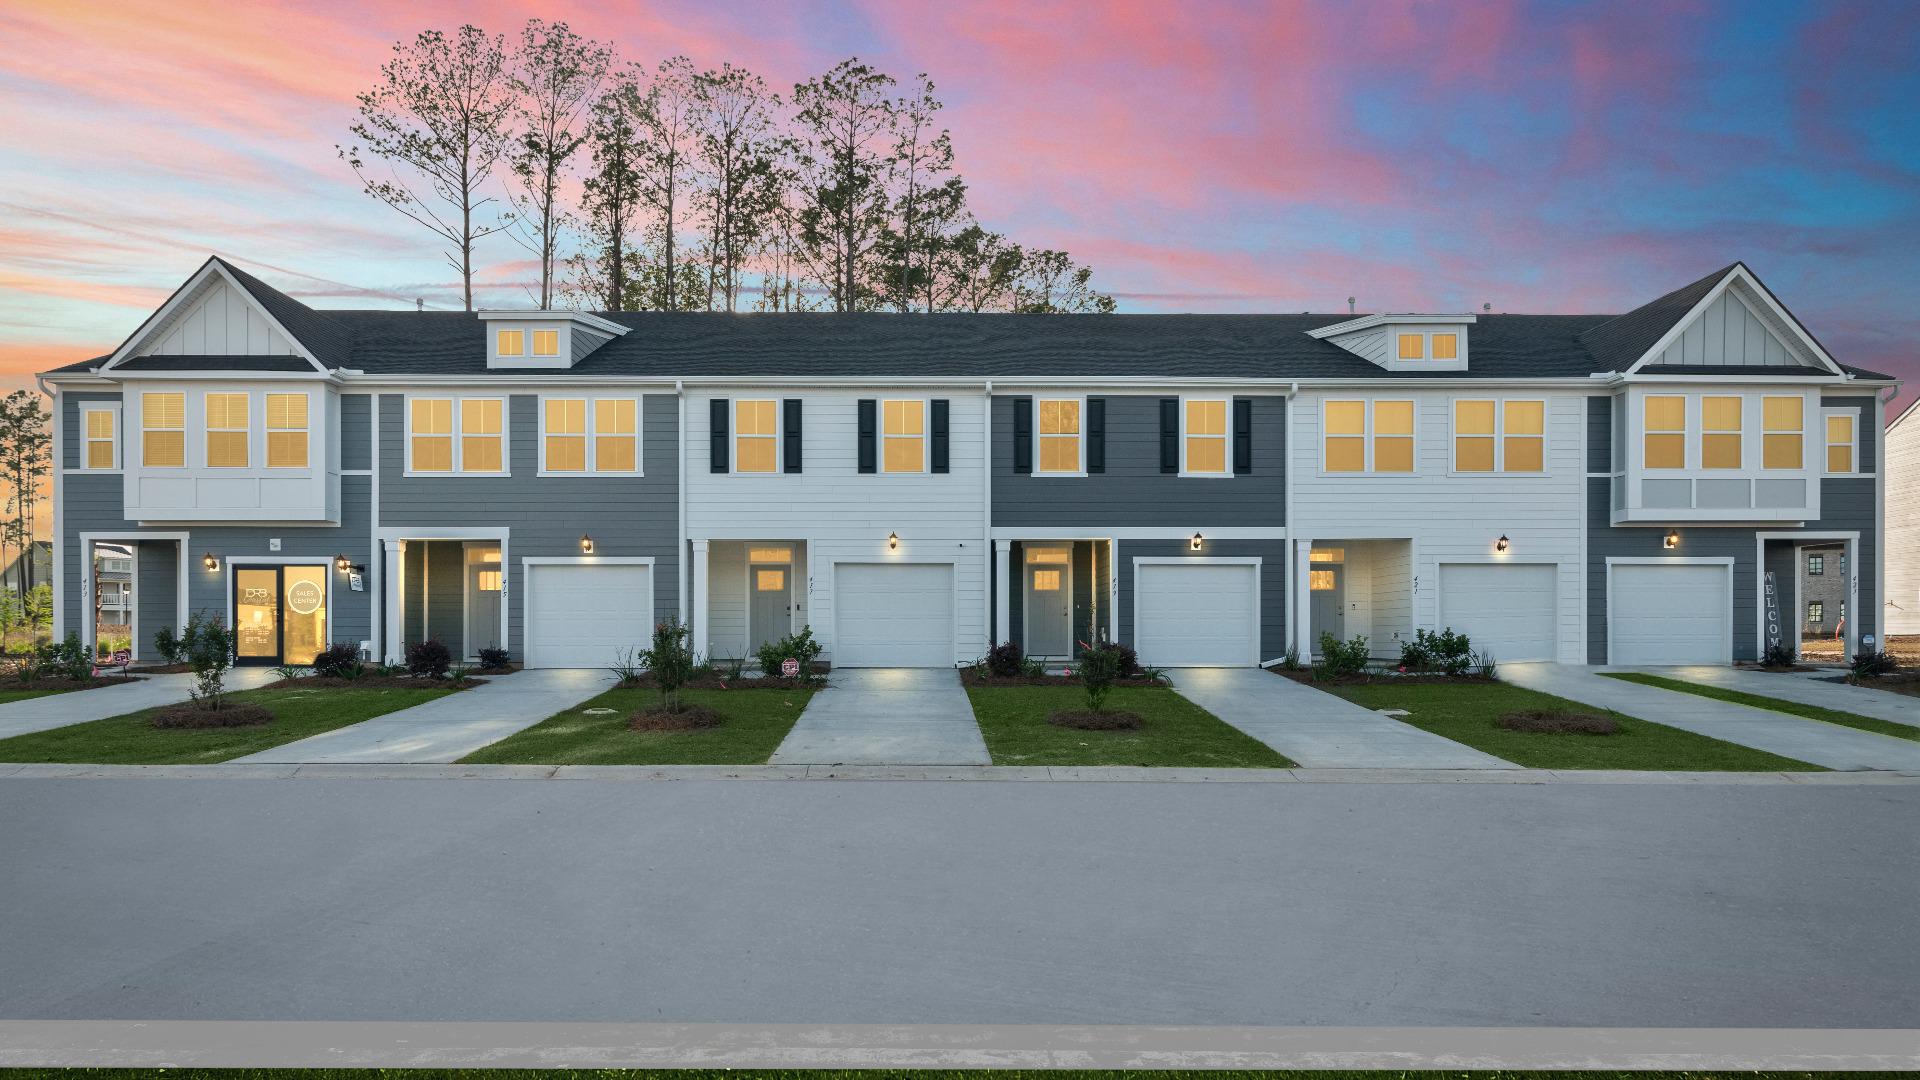 Row of six townhomes in the DRB Homes Boykins Run community